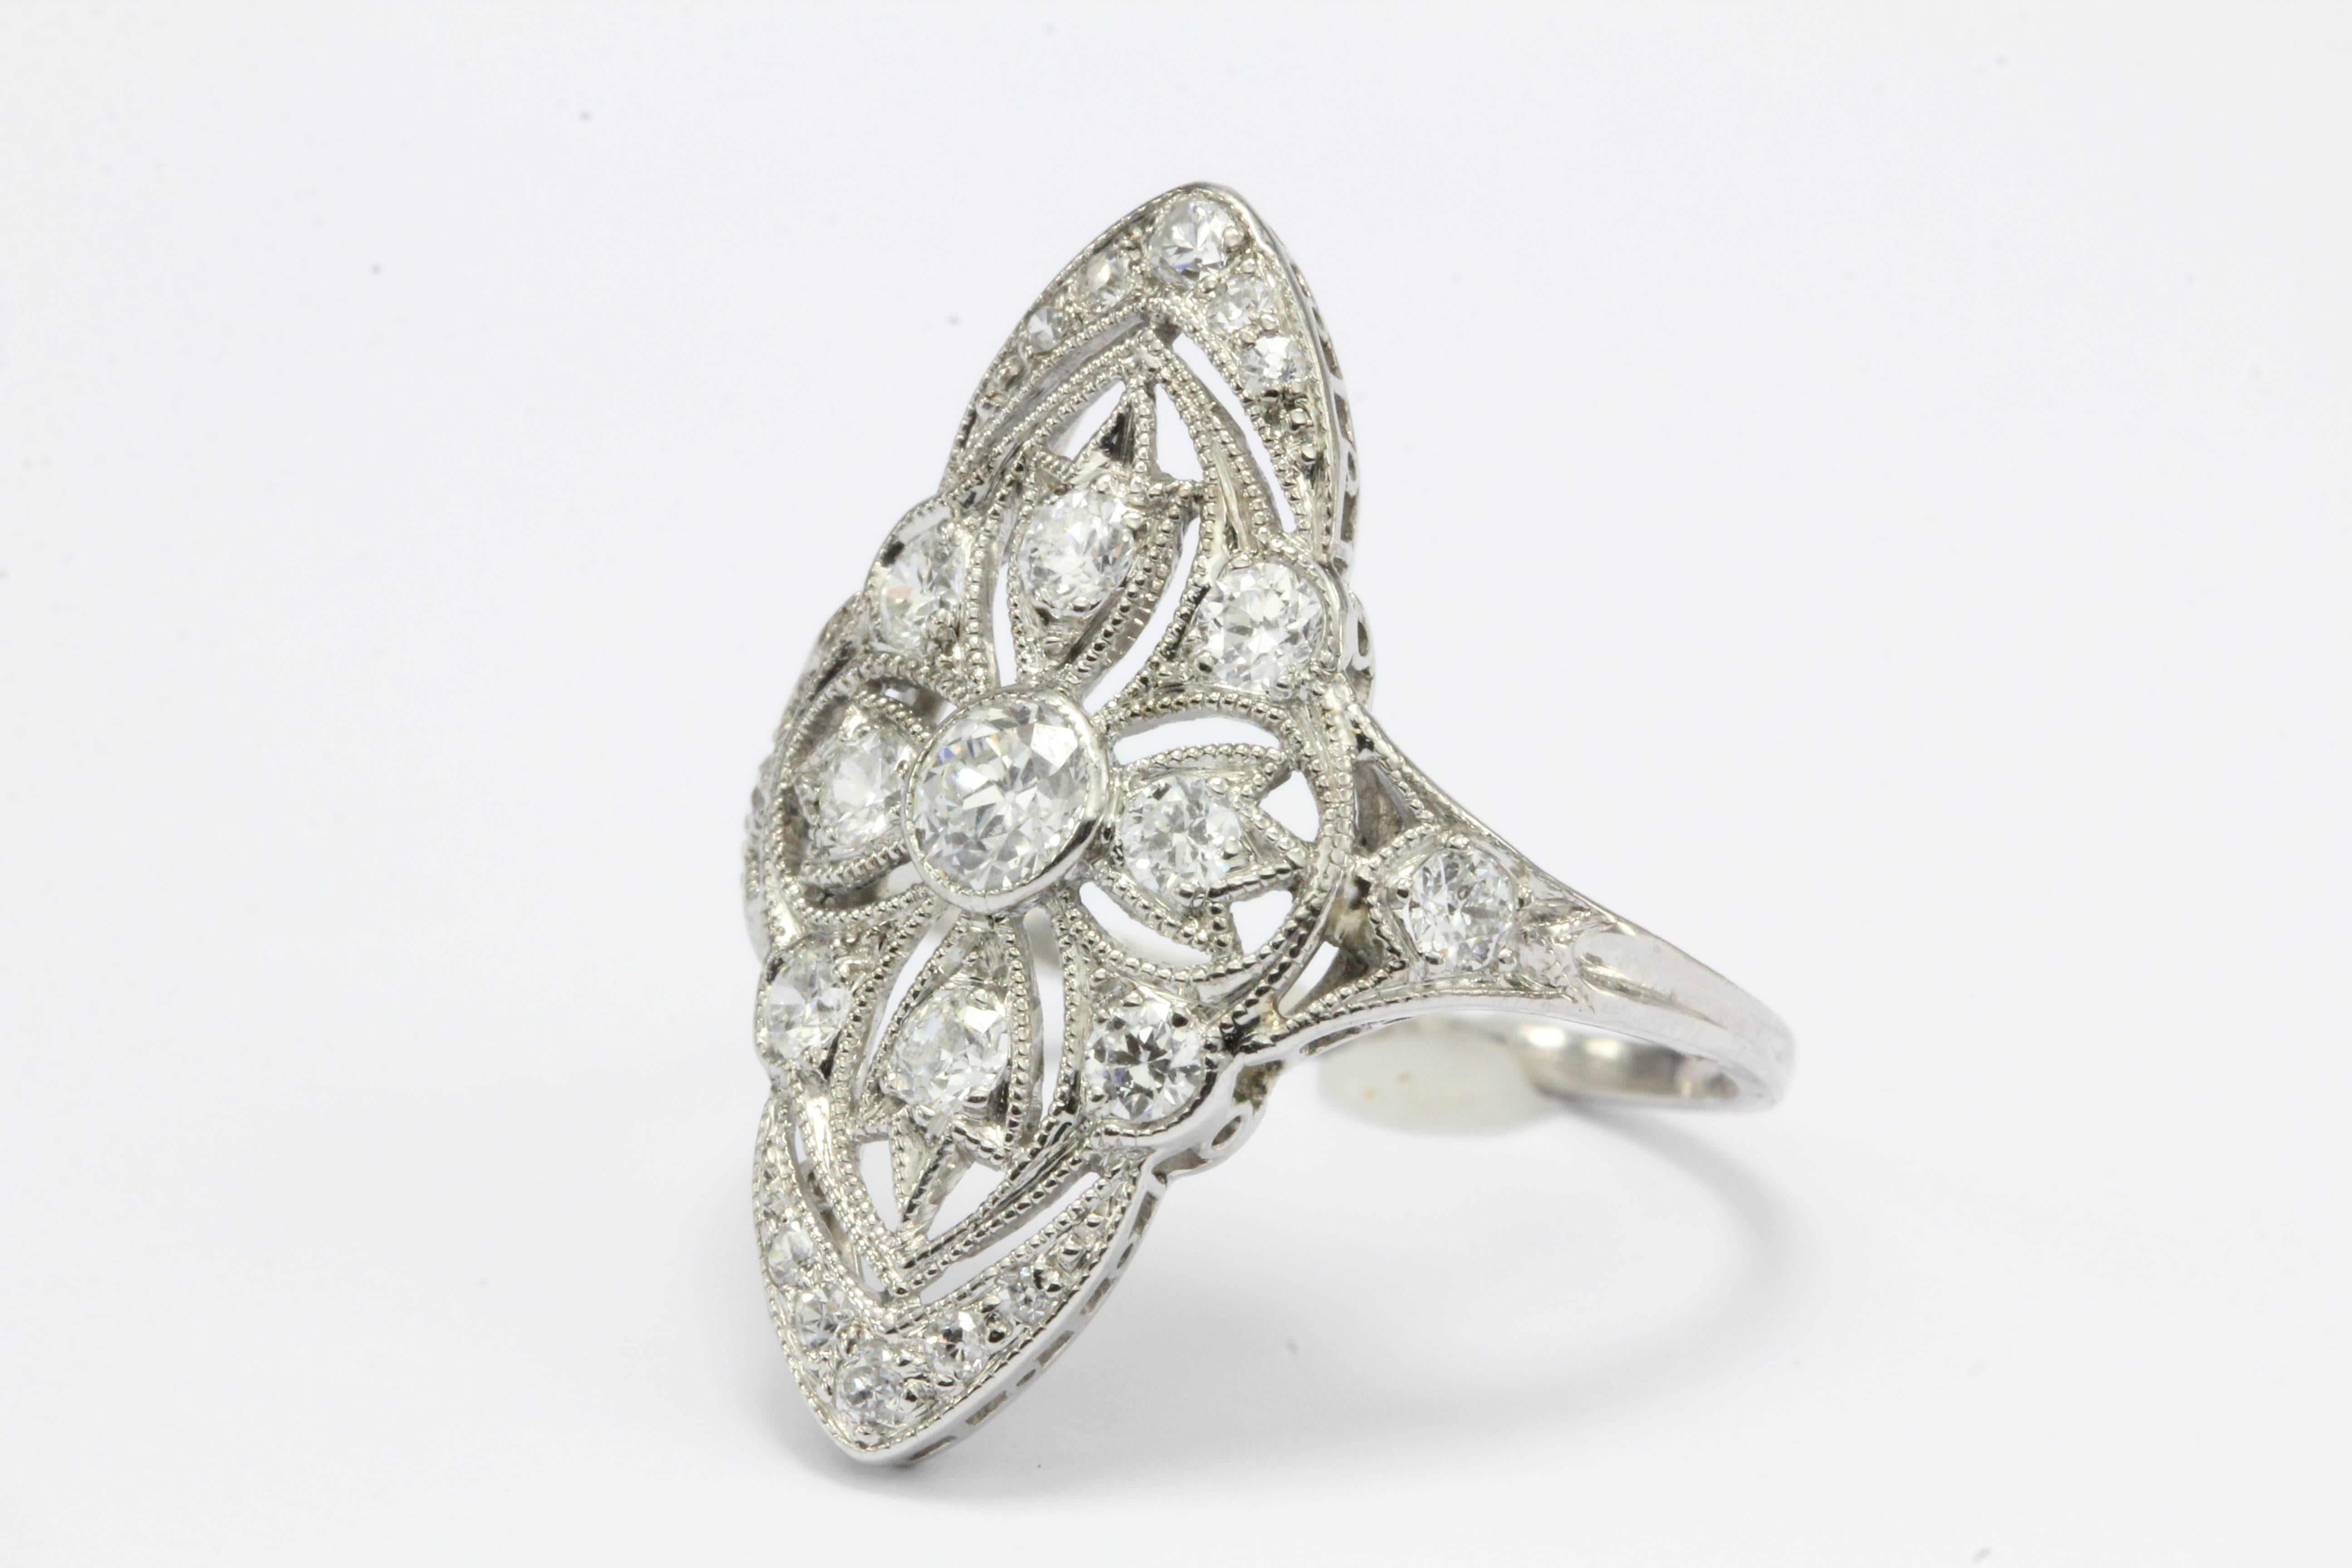 Era: Art Deco

Composition: Platinum 

Primary Stone: Diamonds

Stone Carat: .80 CTW

Color: F/G

Clarity: VS 1/2

Shape: Old European Cut

Ring Size: 5.25

Ring Weight: 3.34 grams

Ring Condition: Excellent Condition